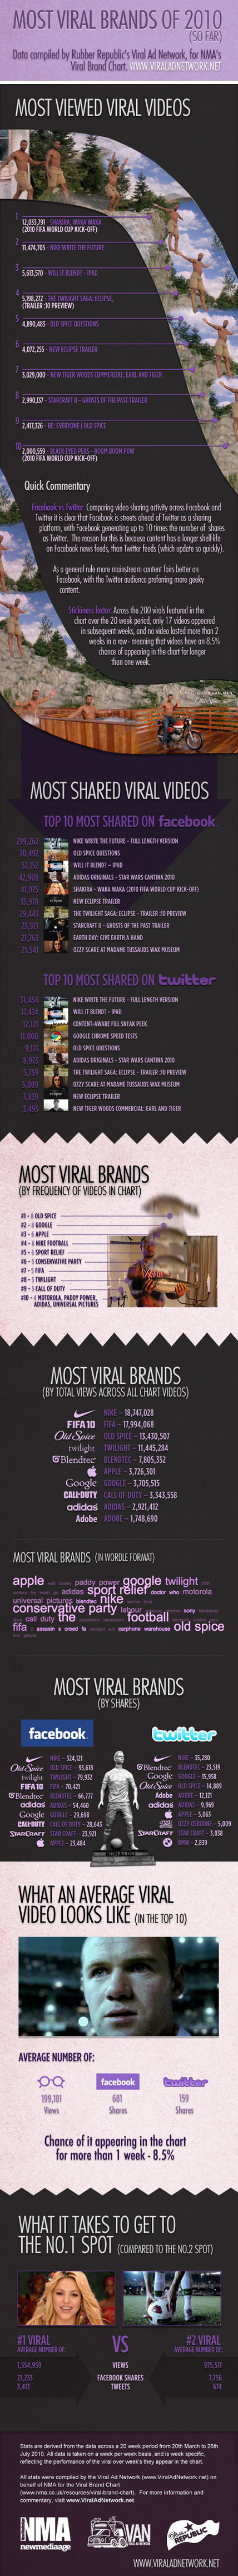 Viral brands overview of 2010